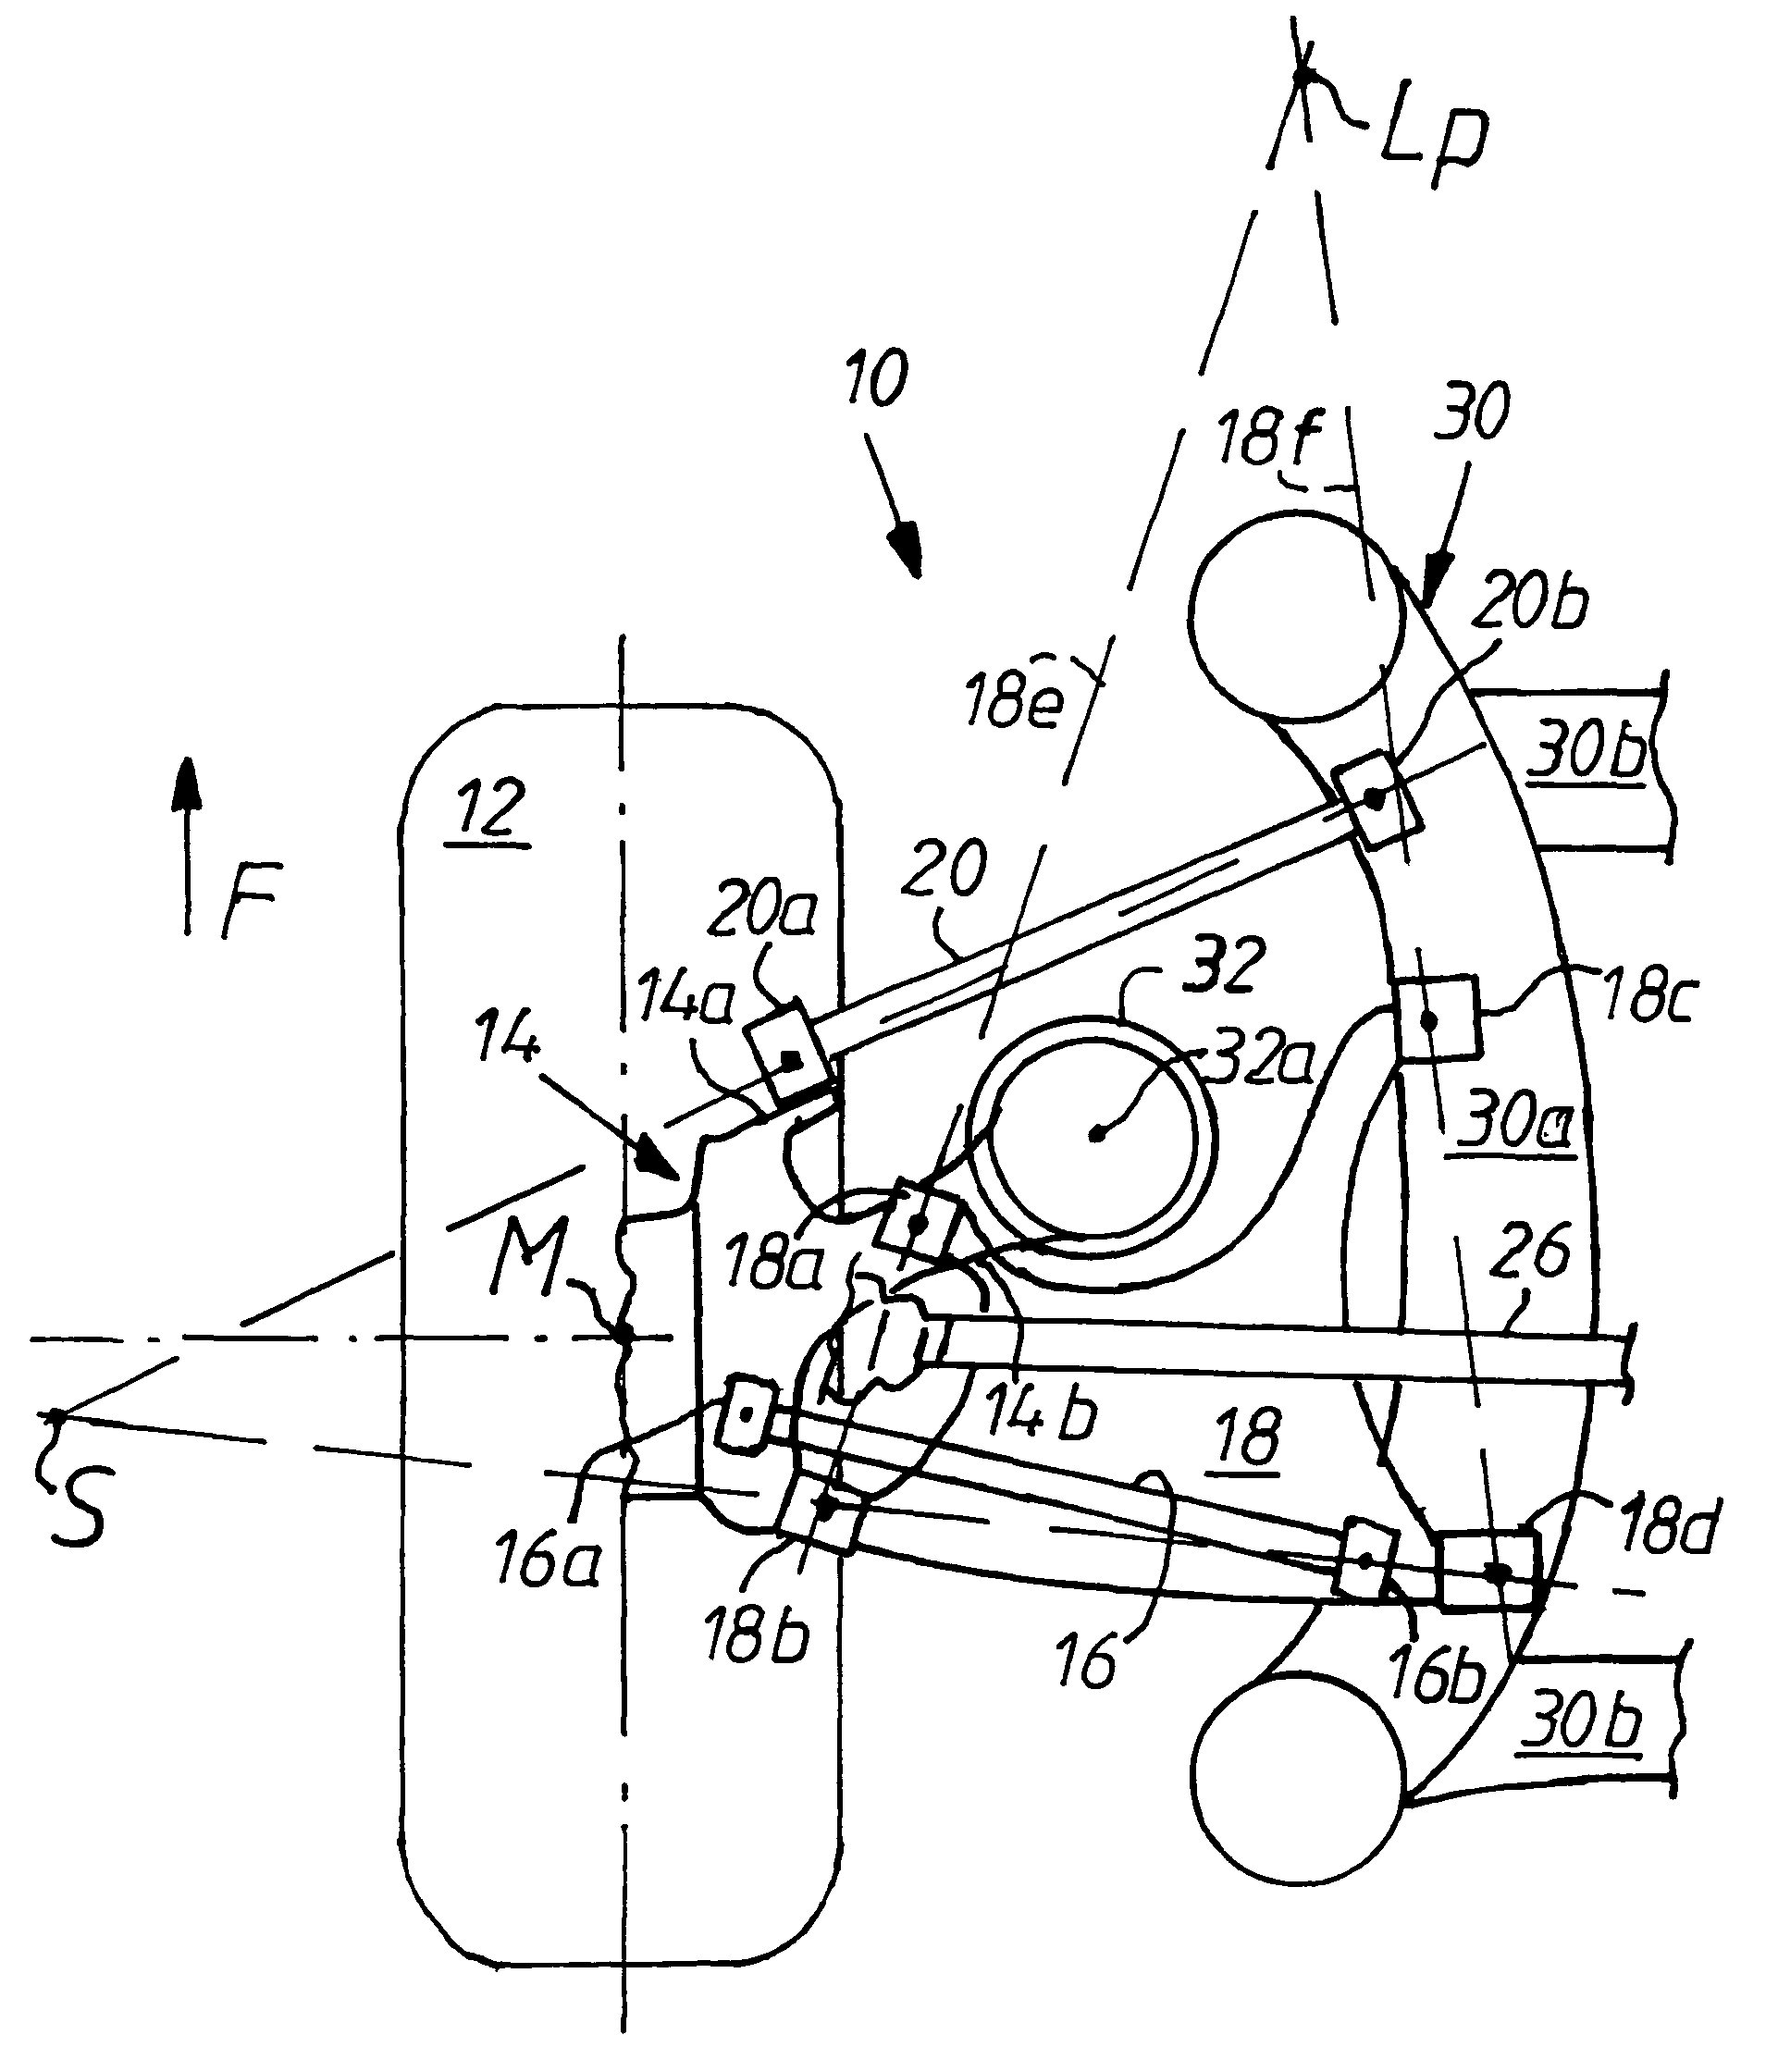 Independent wheel suspension for the rear wheels of motor vehicles